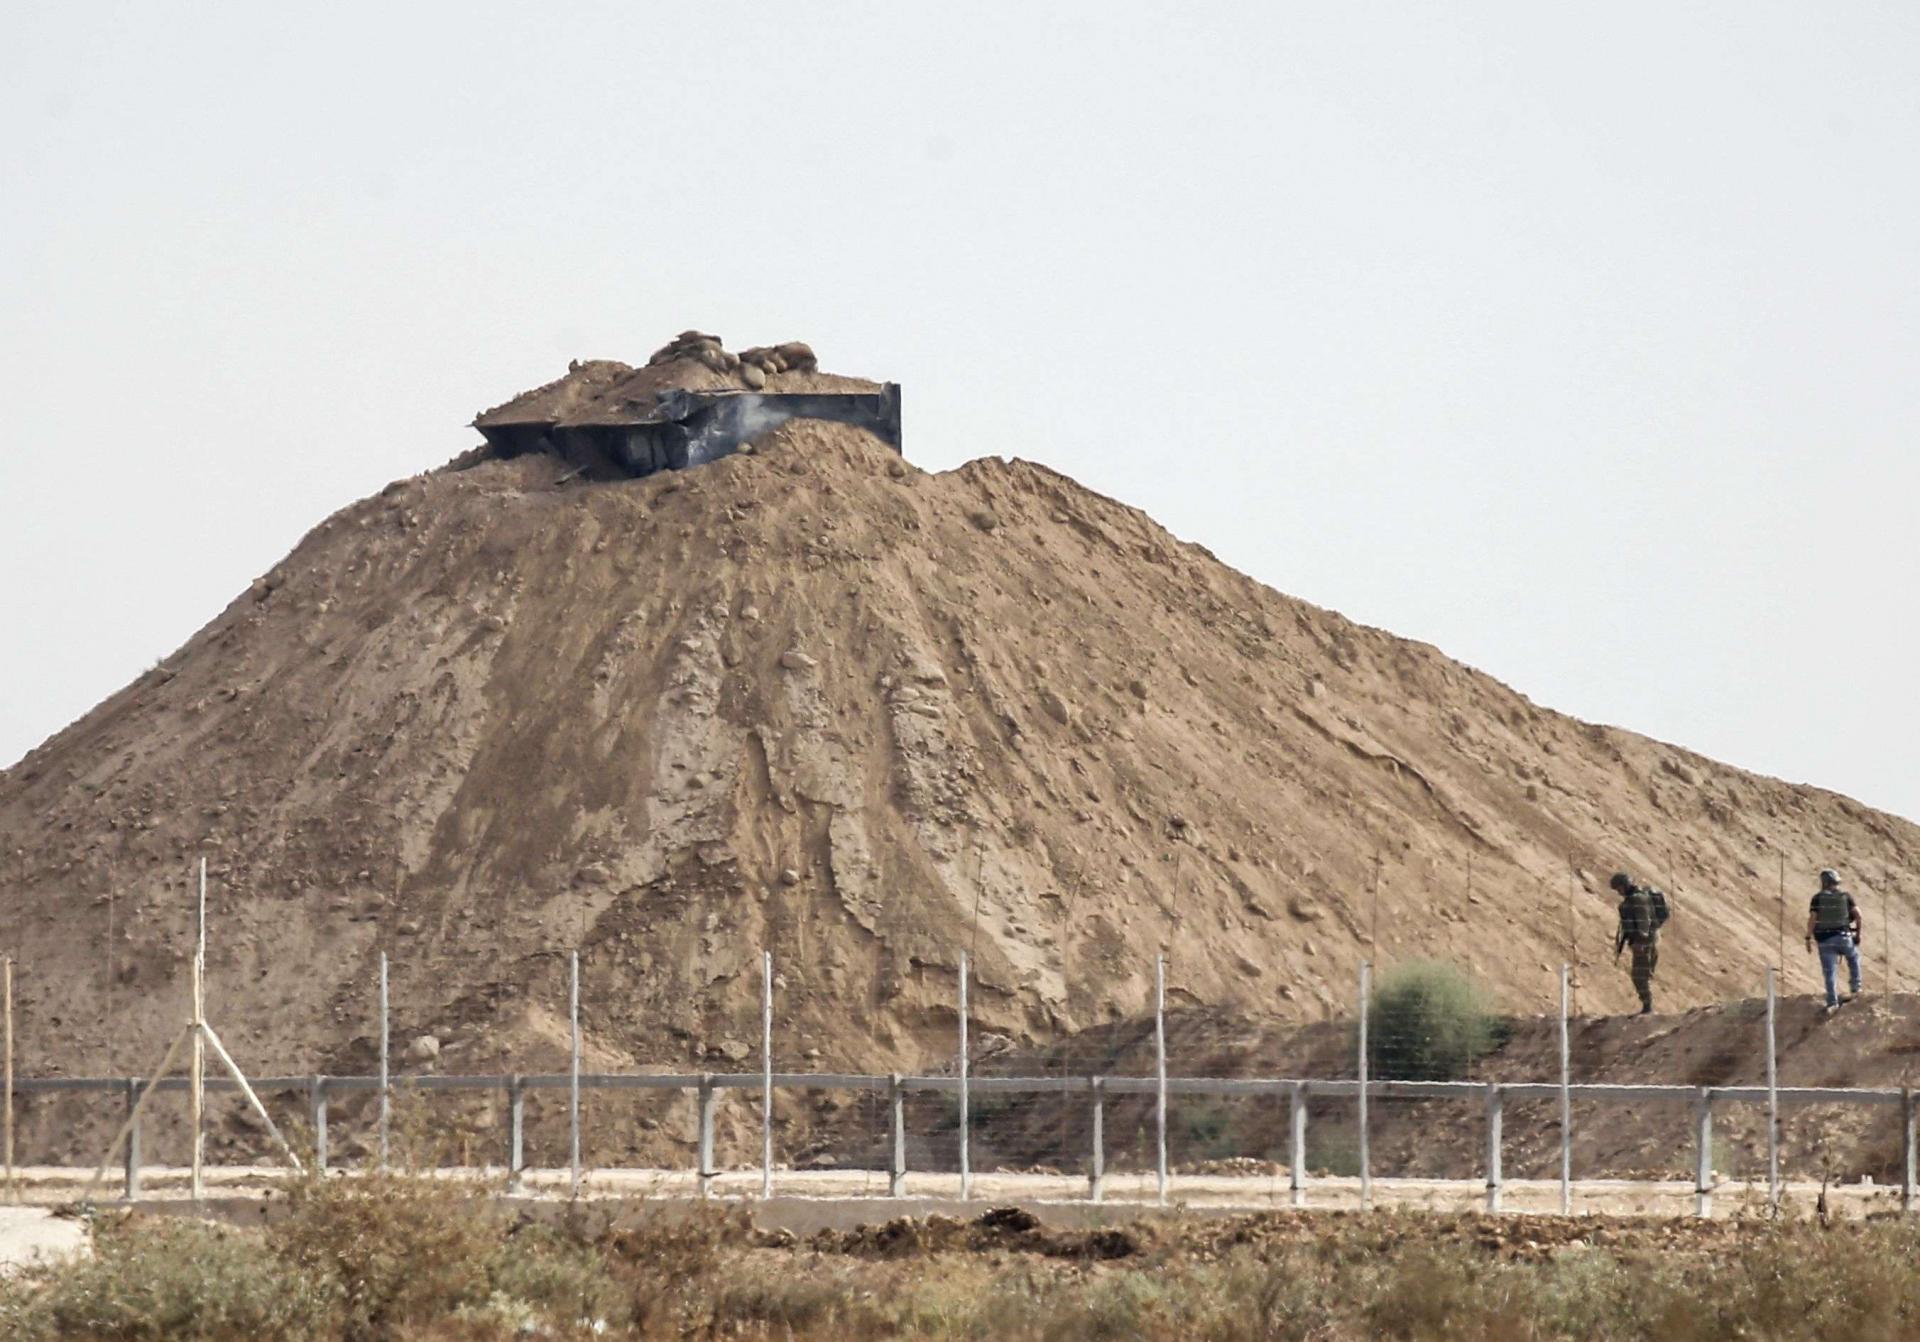 During the incident, an Israeli tank also targeted a Hamas military post in the area